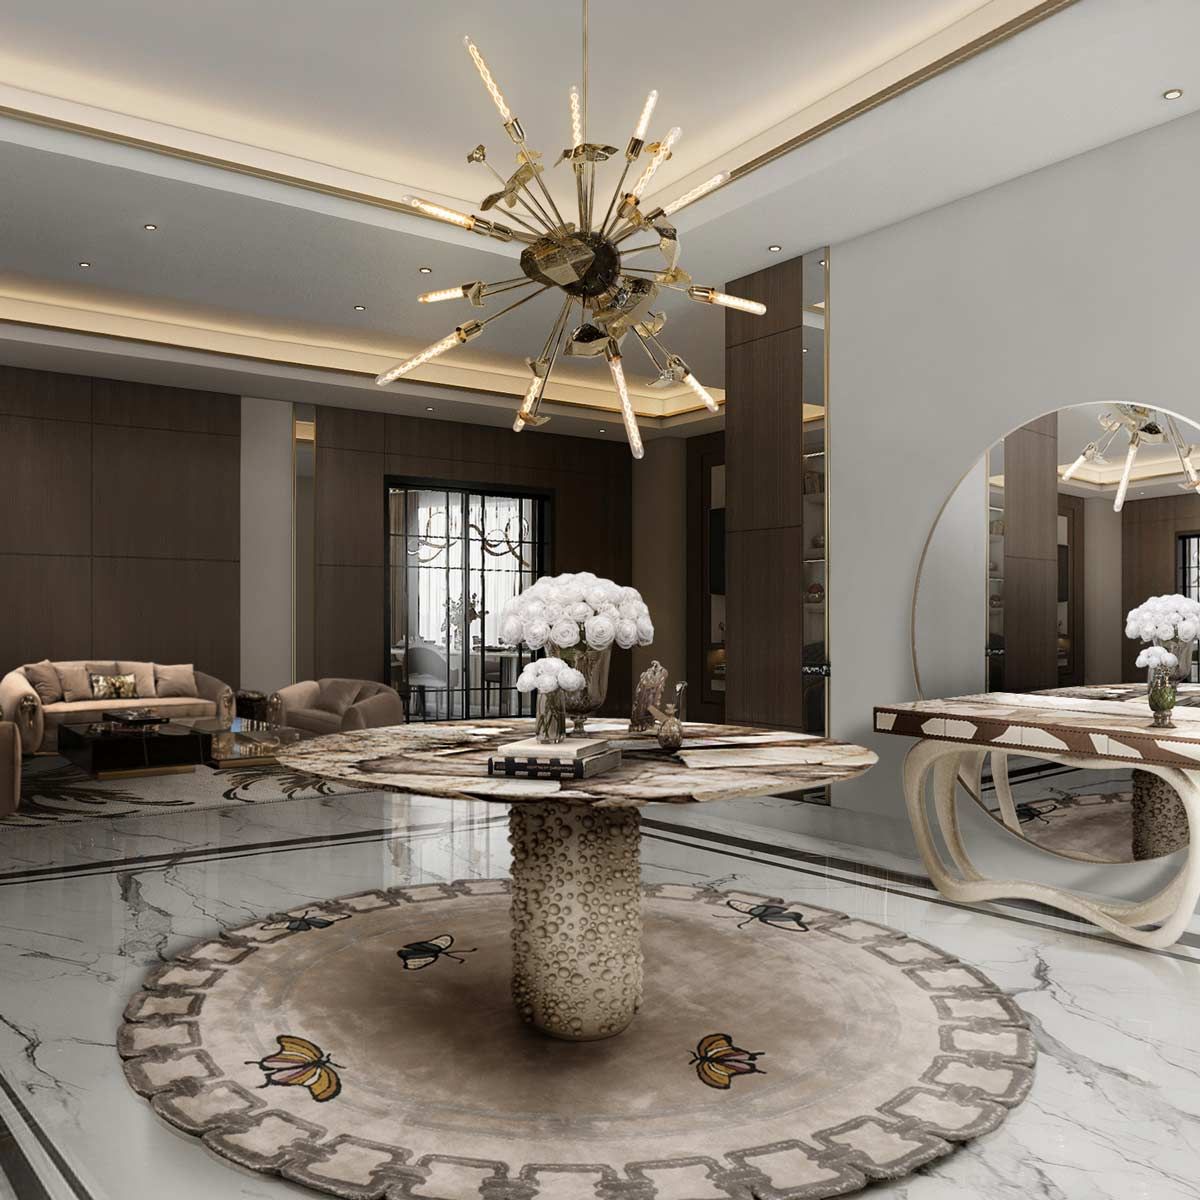 Patagon Round Dining Table
by Covet House